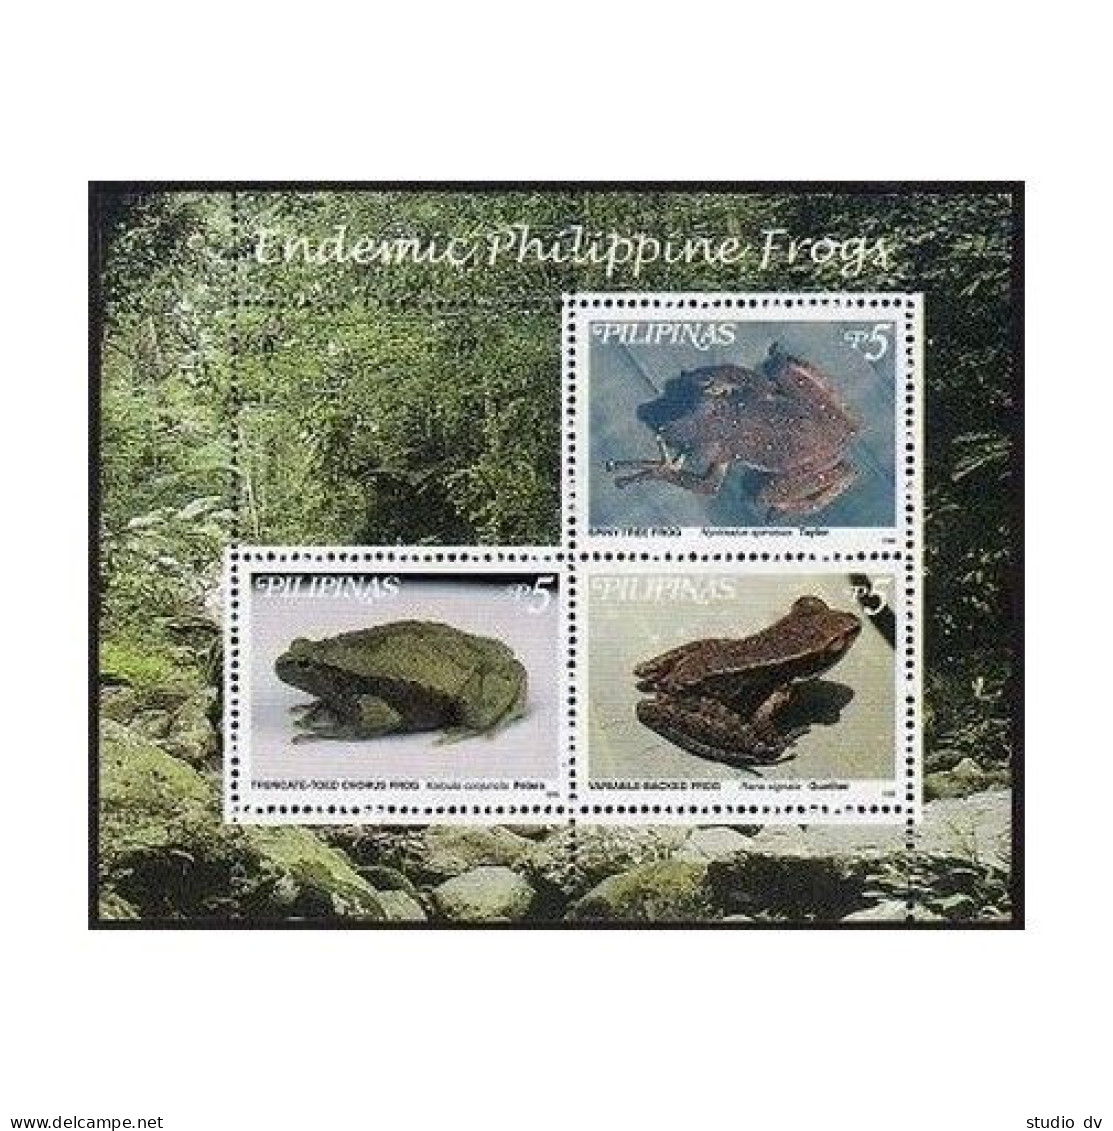 Philippines 2612 Ad Block, 2613 Ac Sheet, MNH. Frogs, 1999. - Philippines